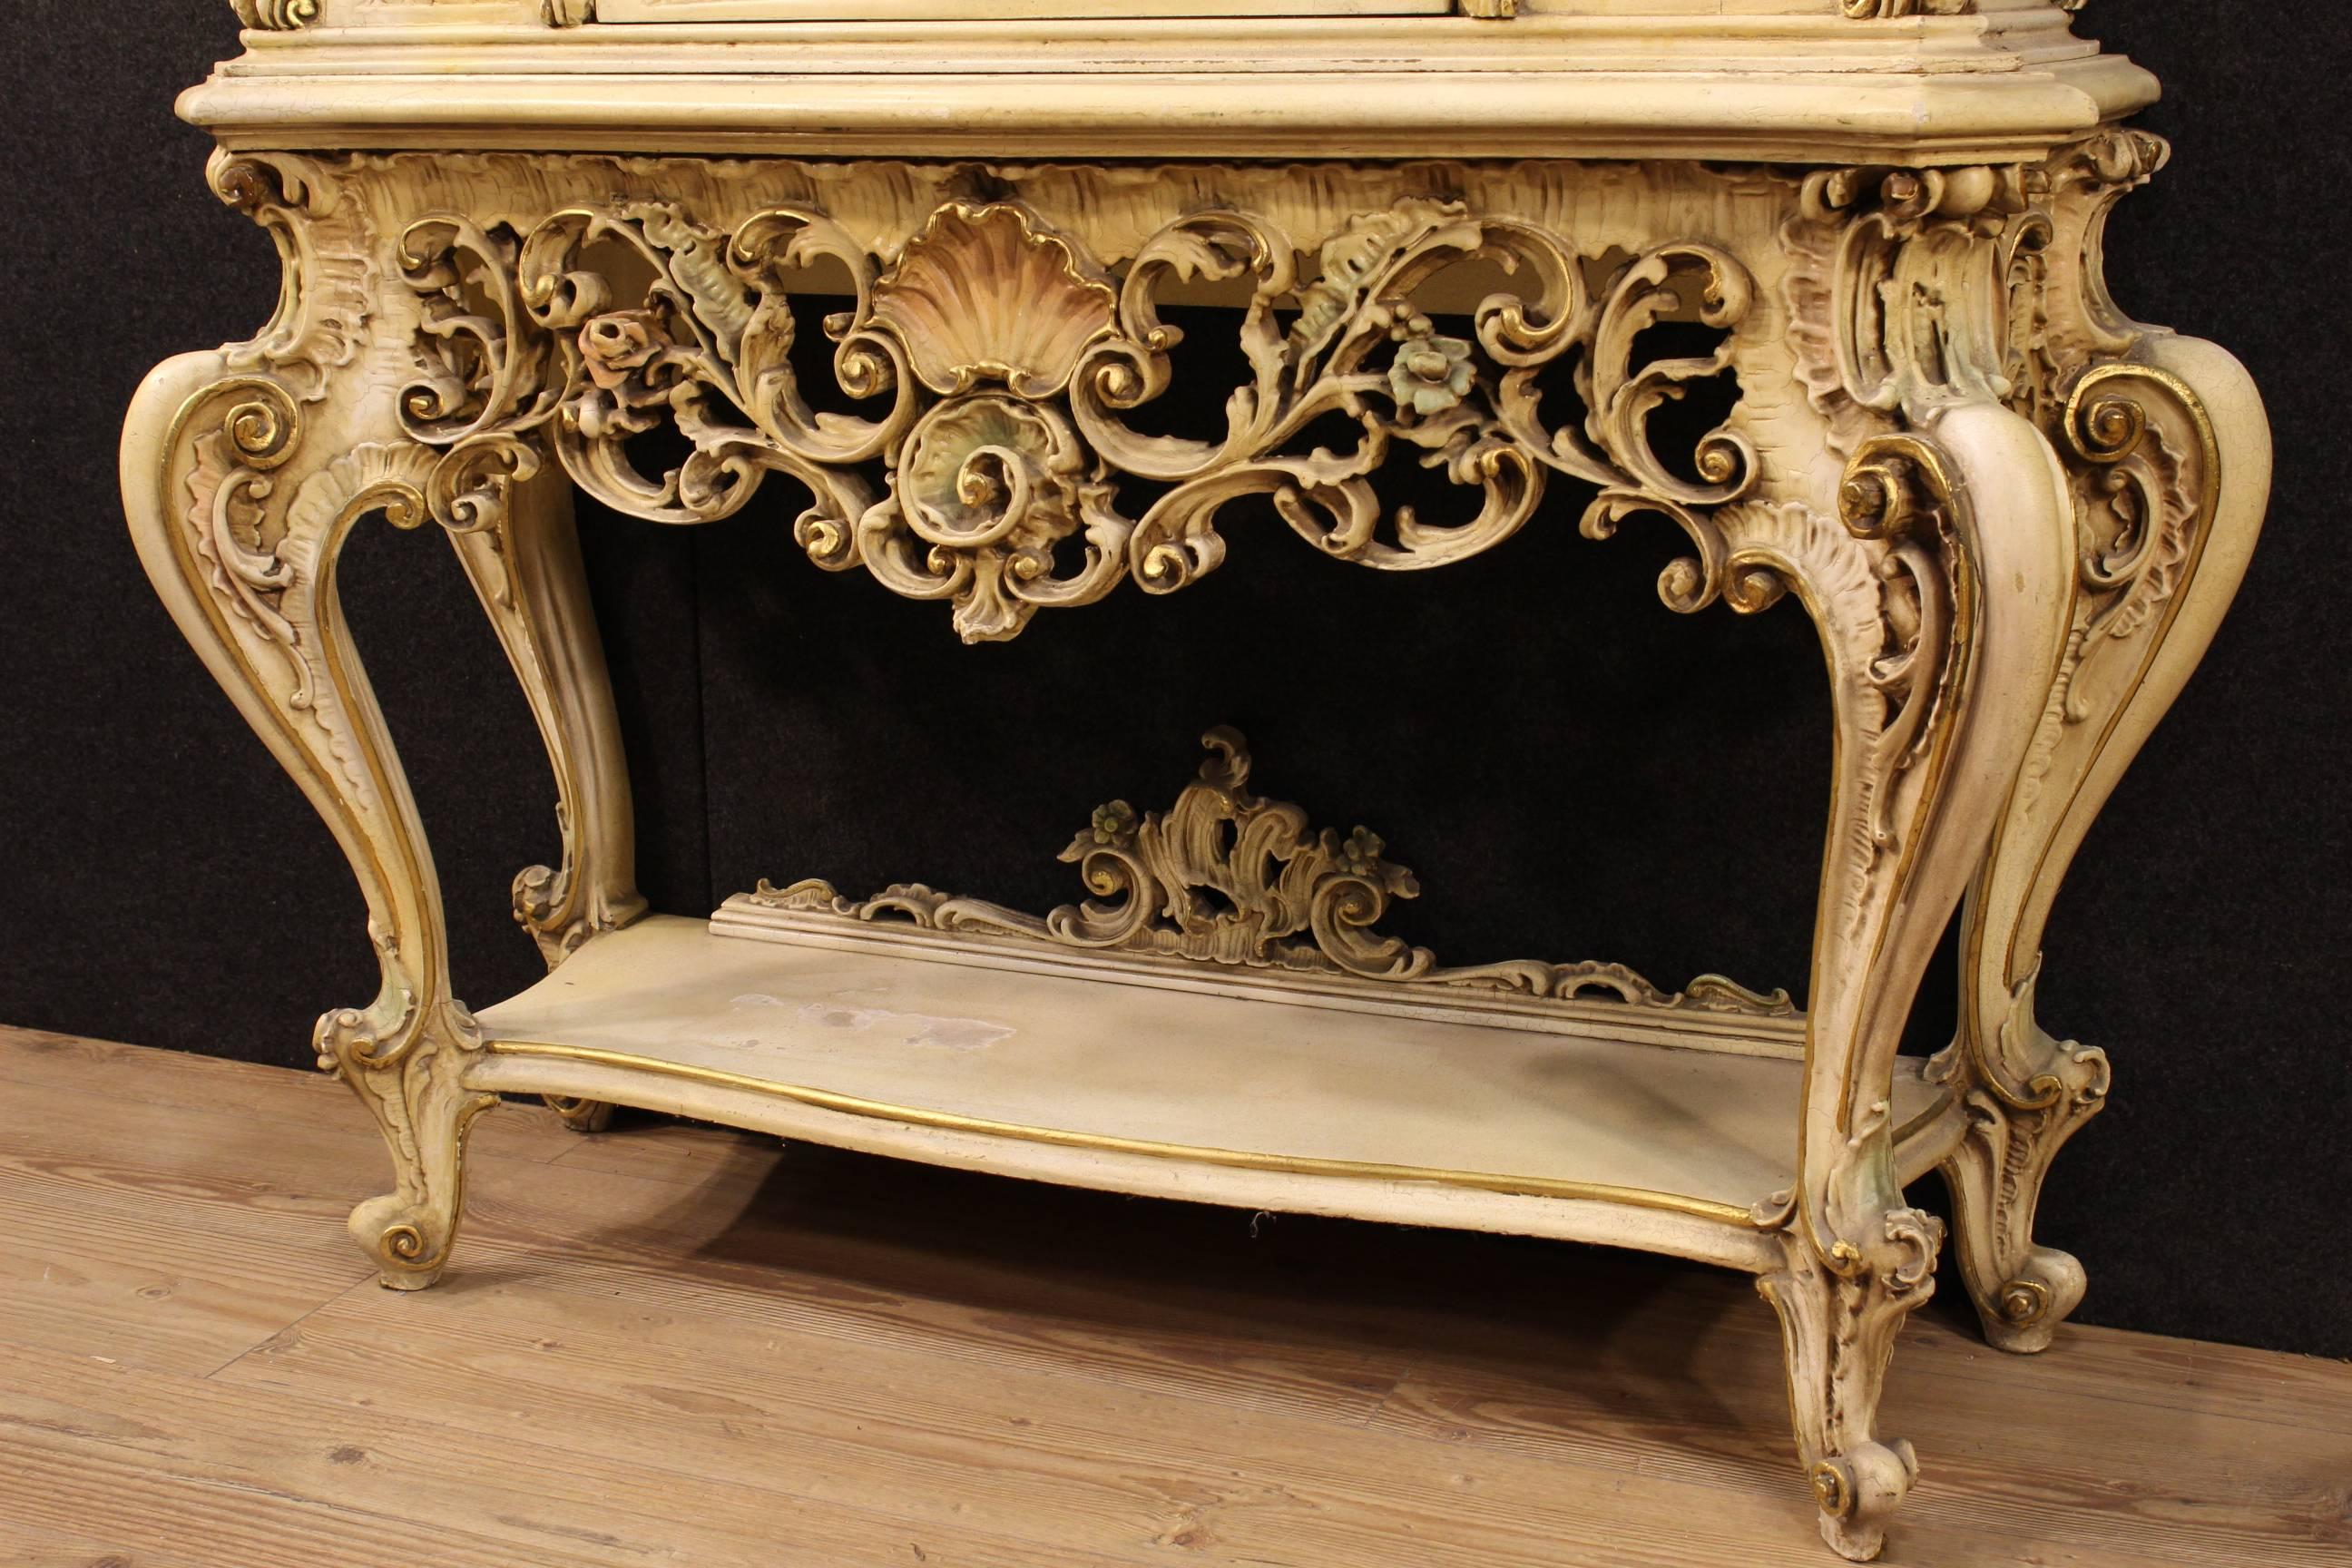 Gilt 20th Century Venetian Lacquered and Gilded Showcase